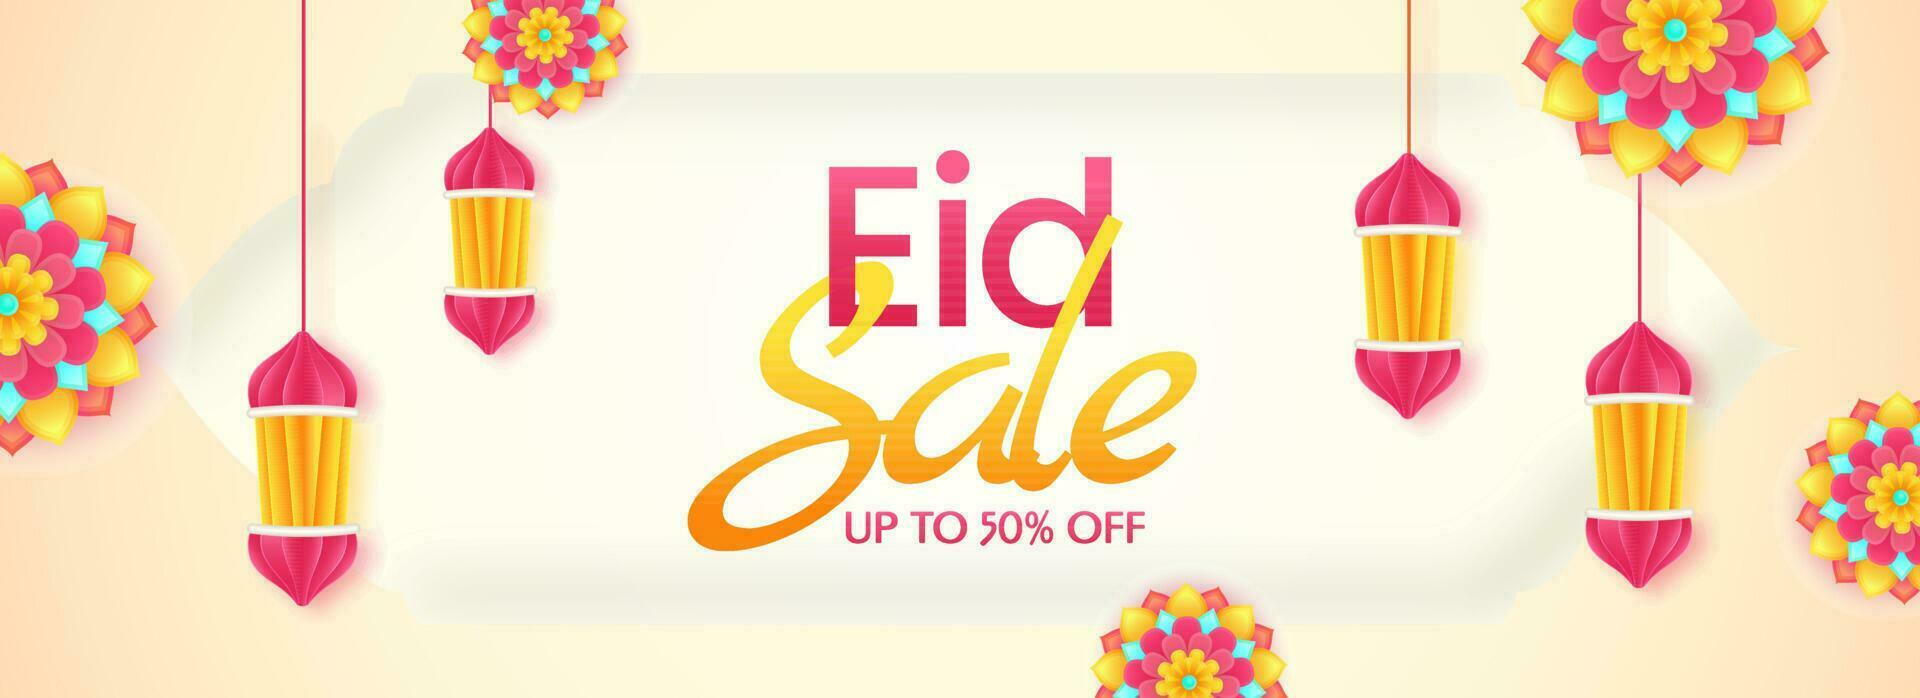 Eid Sale Banner Or Header Design Decorated With Colorful Floral And Paper Cut Lanterns Hang. vector